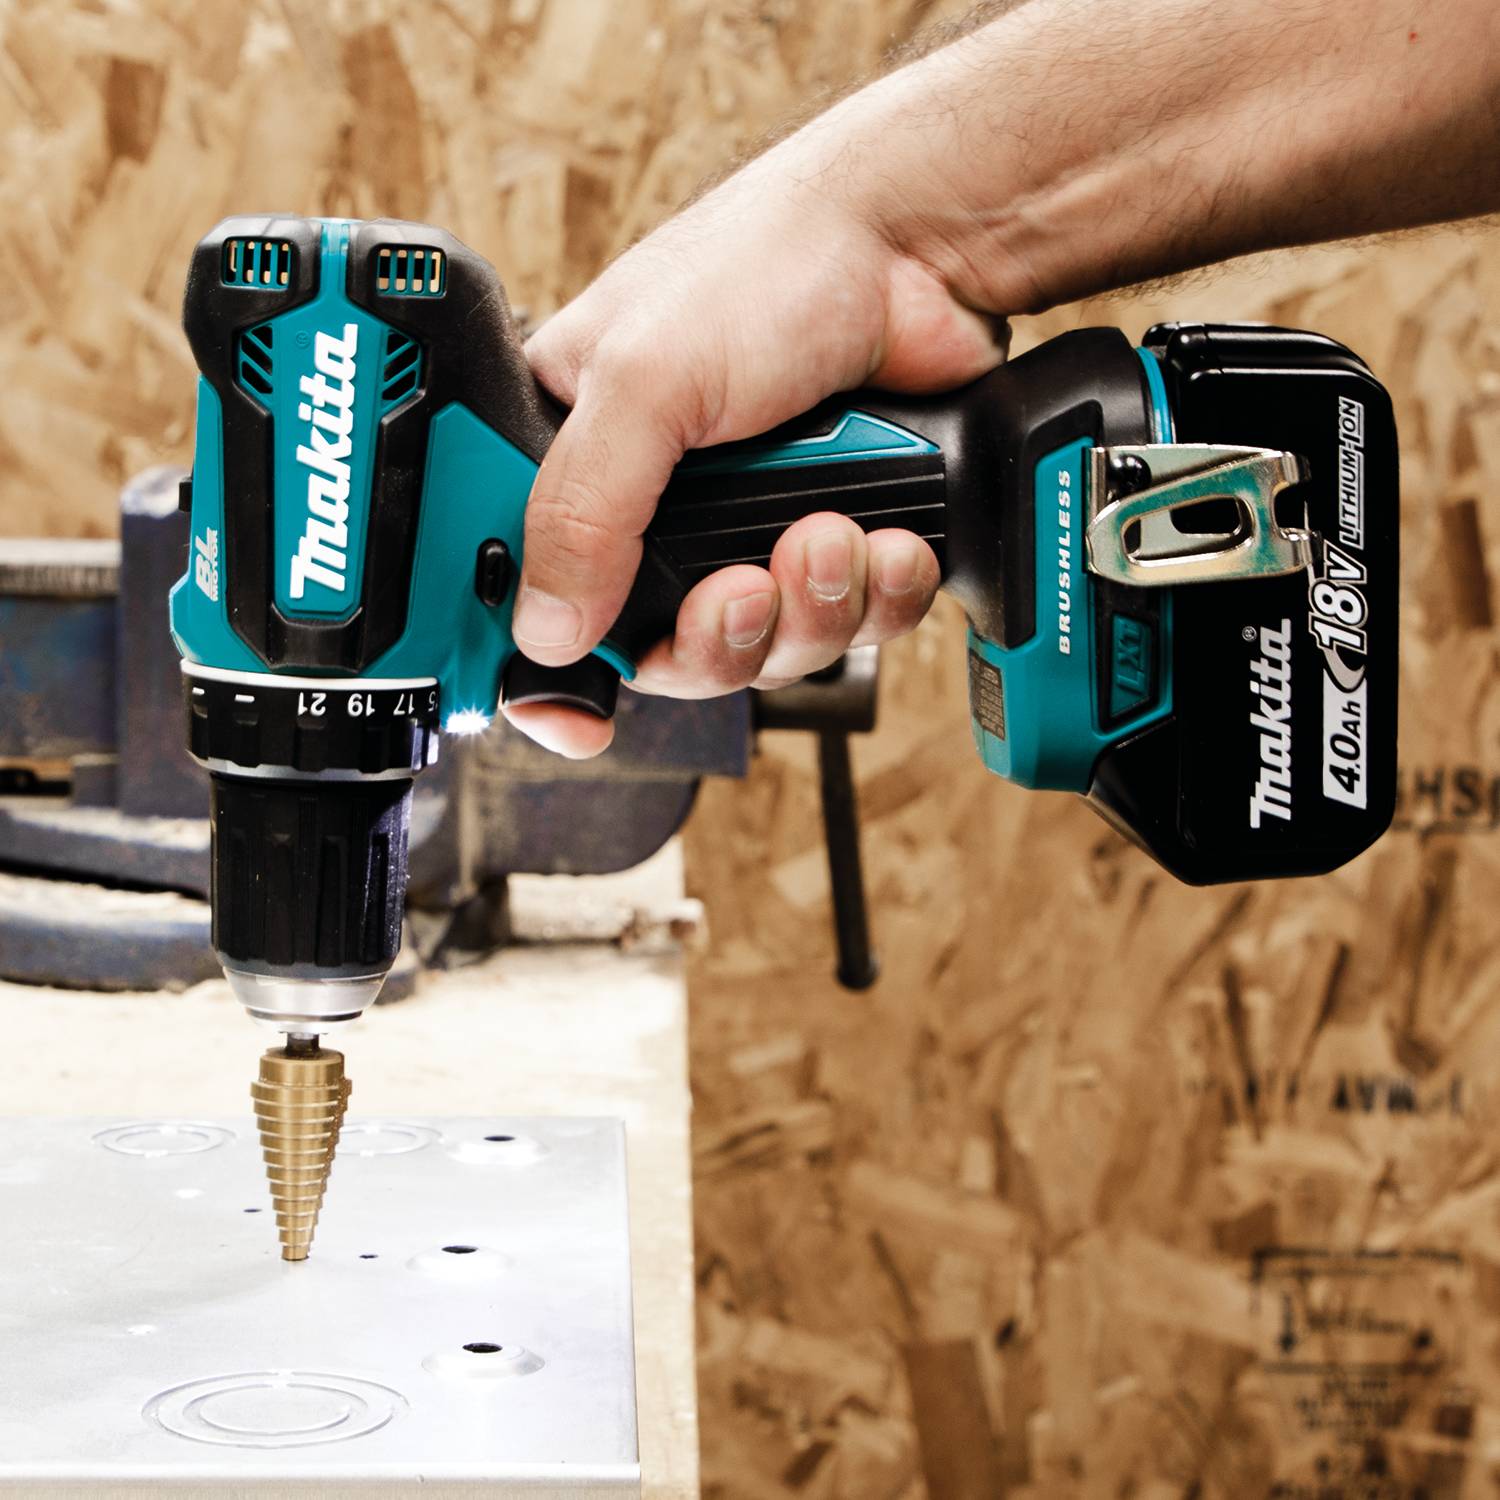 Makita Lithium Ion Brushless Cordless 1/2 Inch Driver Drill Kit from Columbia Safety